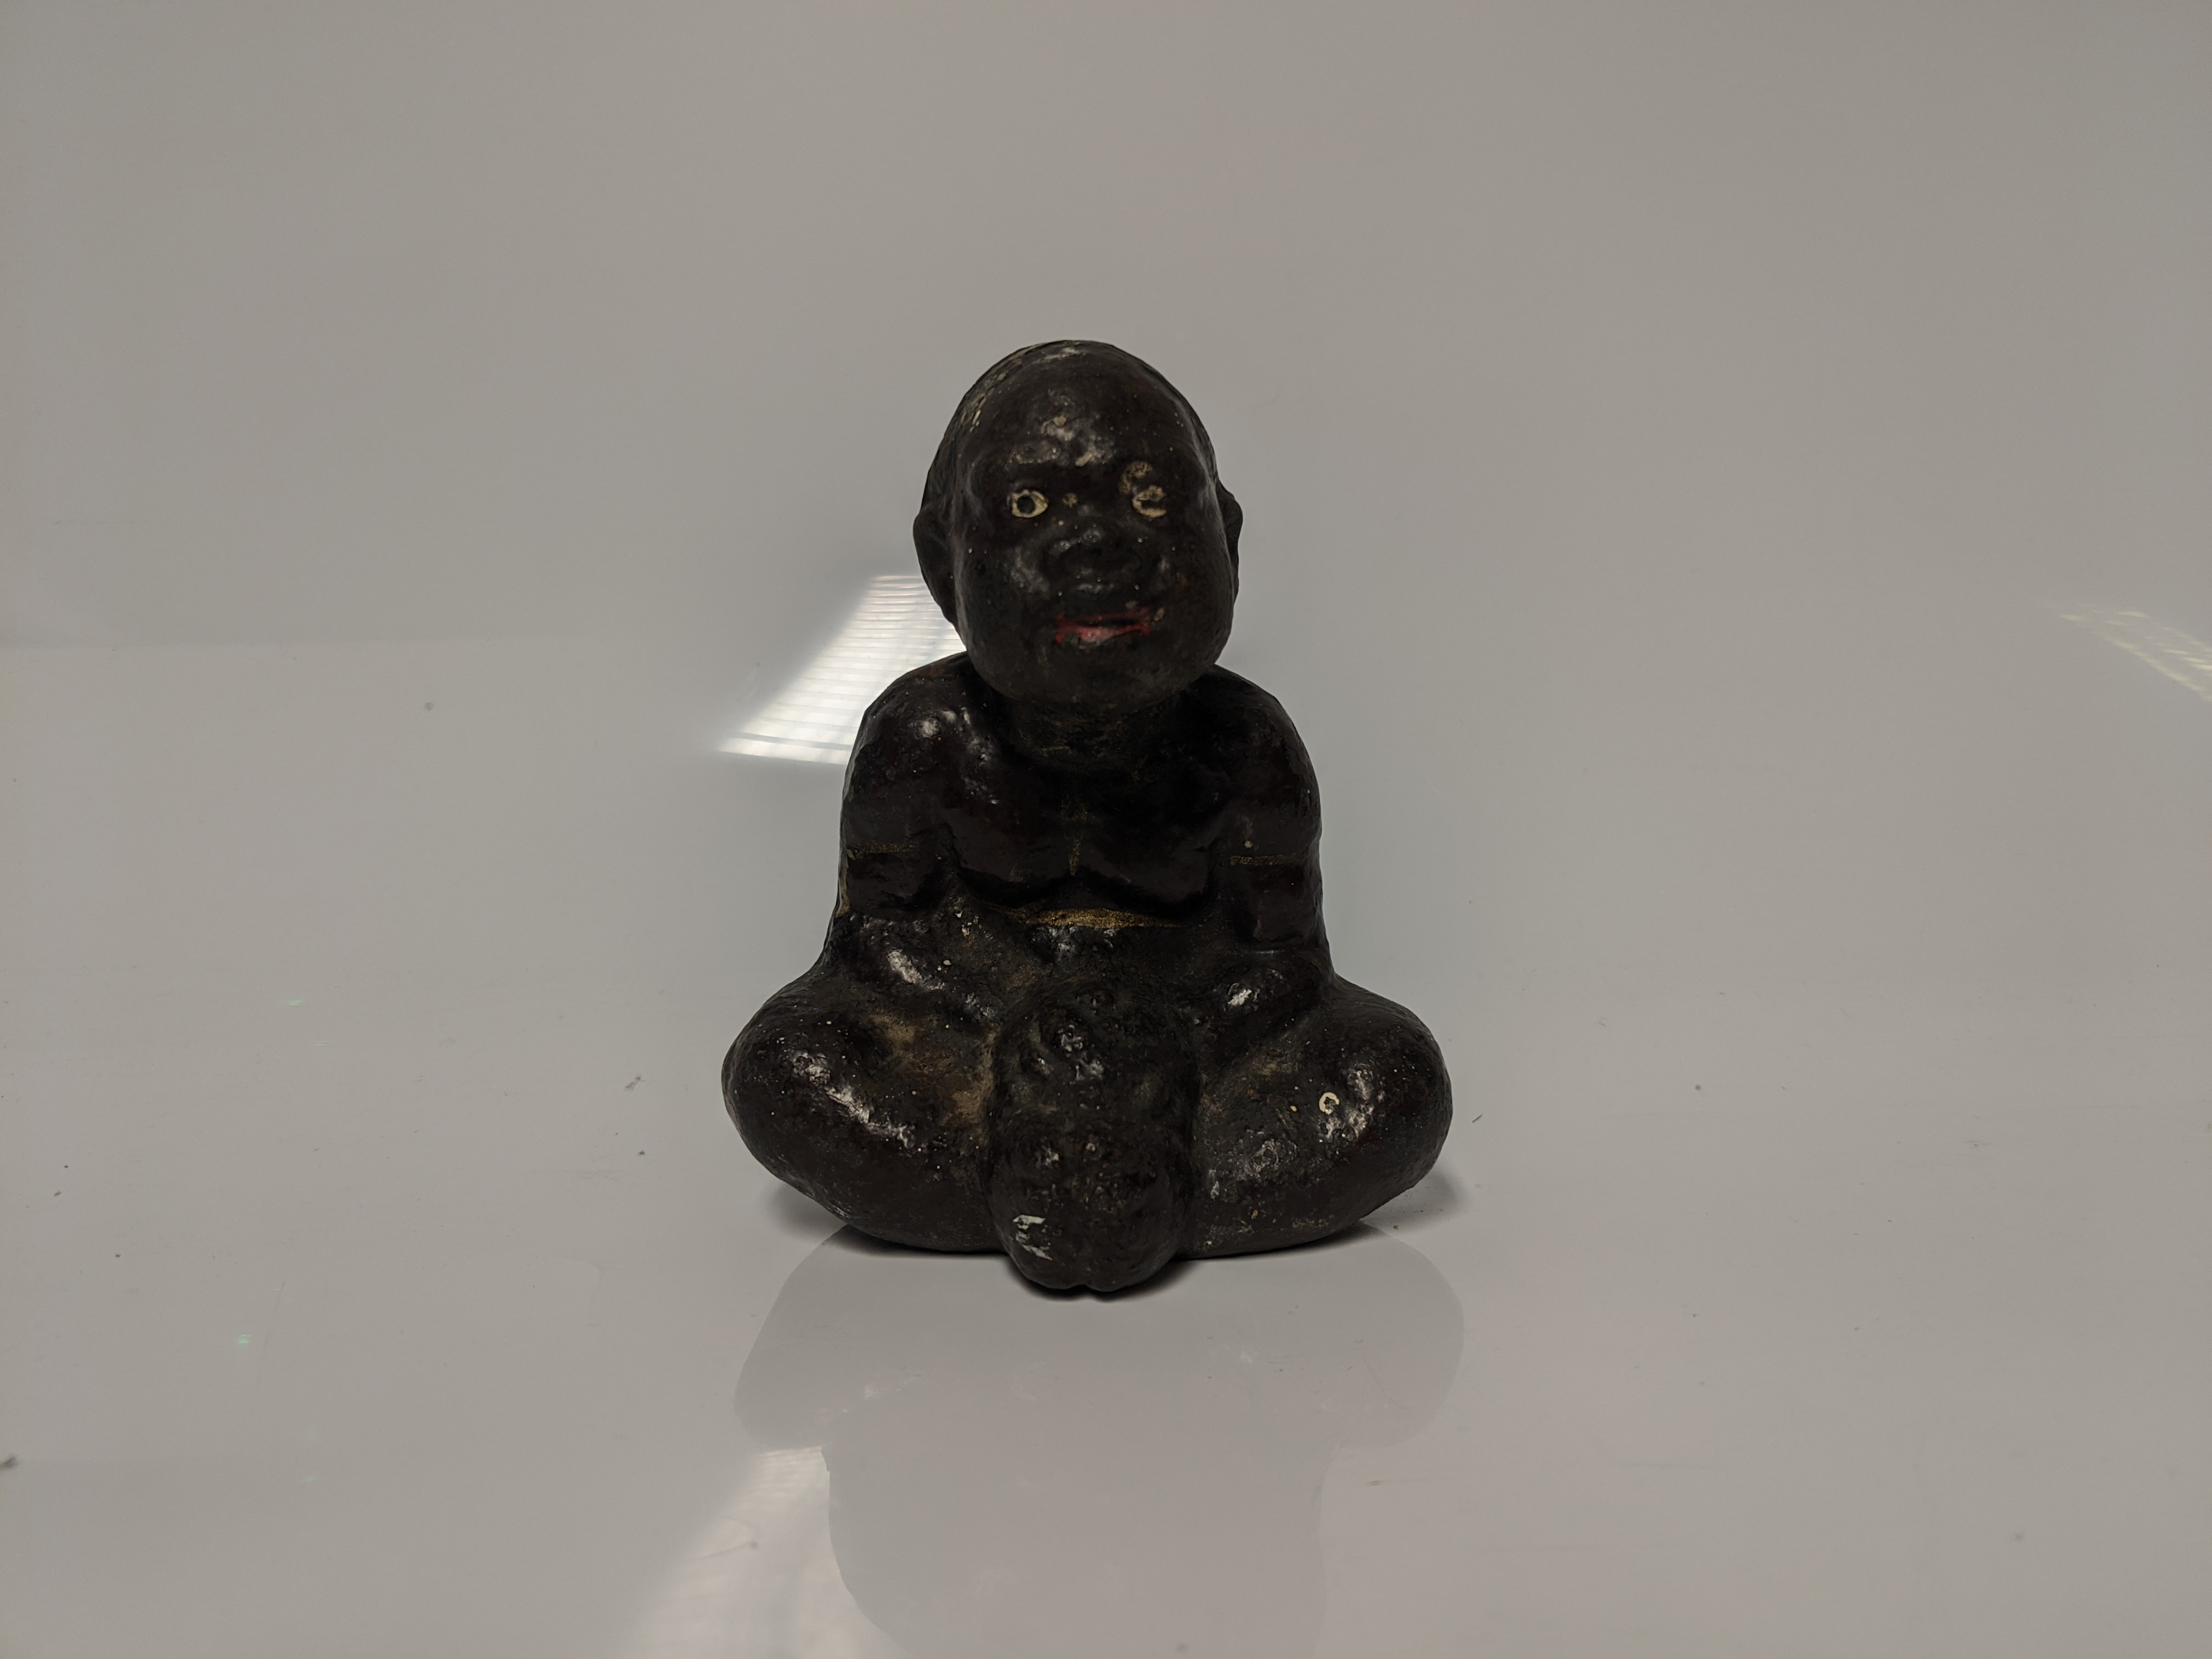 An early 20th century cast iron Black Americana paperweight / figurine of a seated male figure being - Image 2 of 5